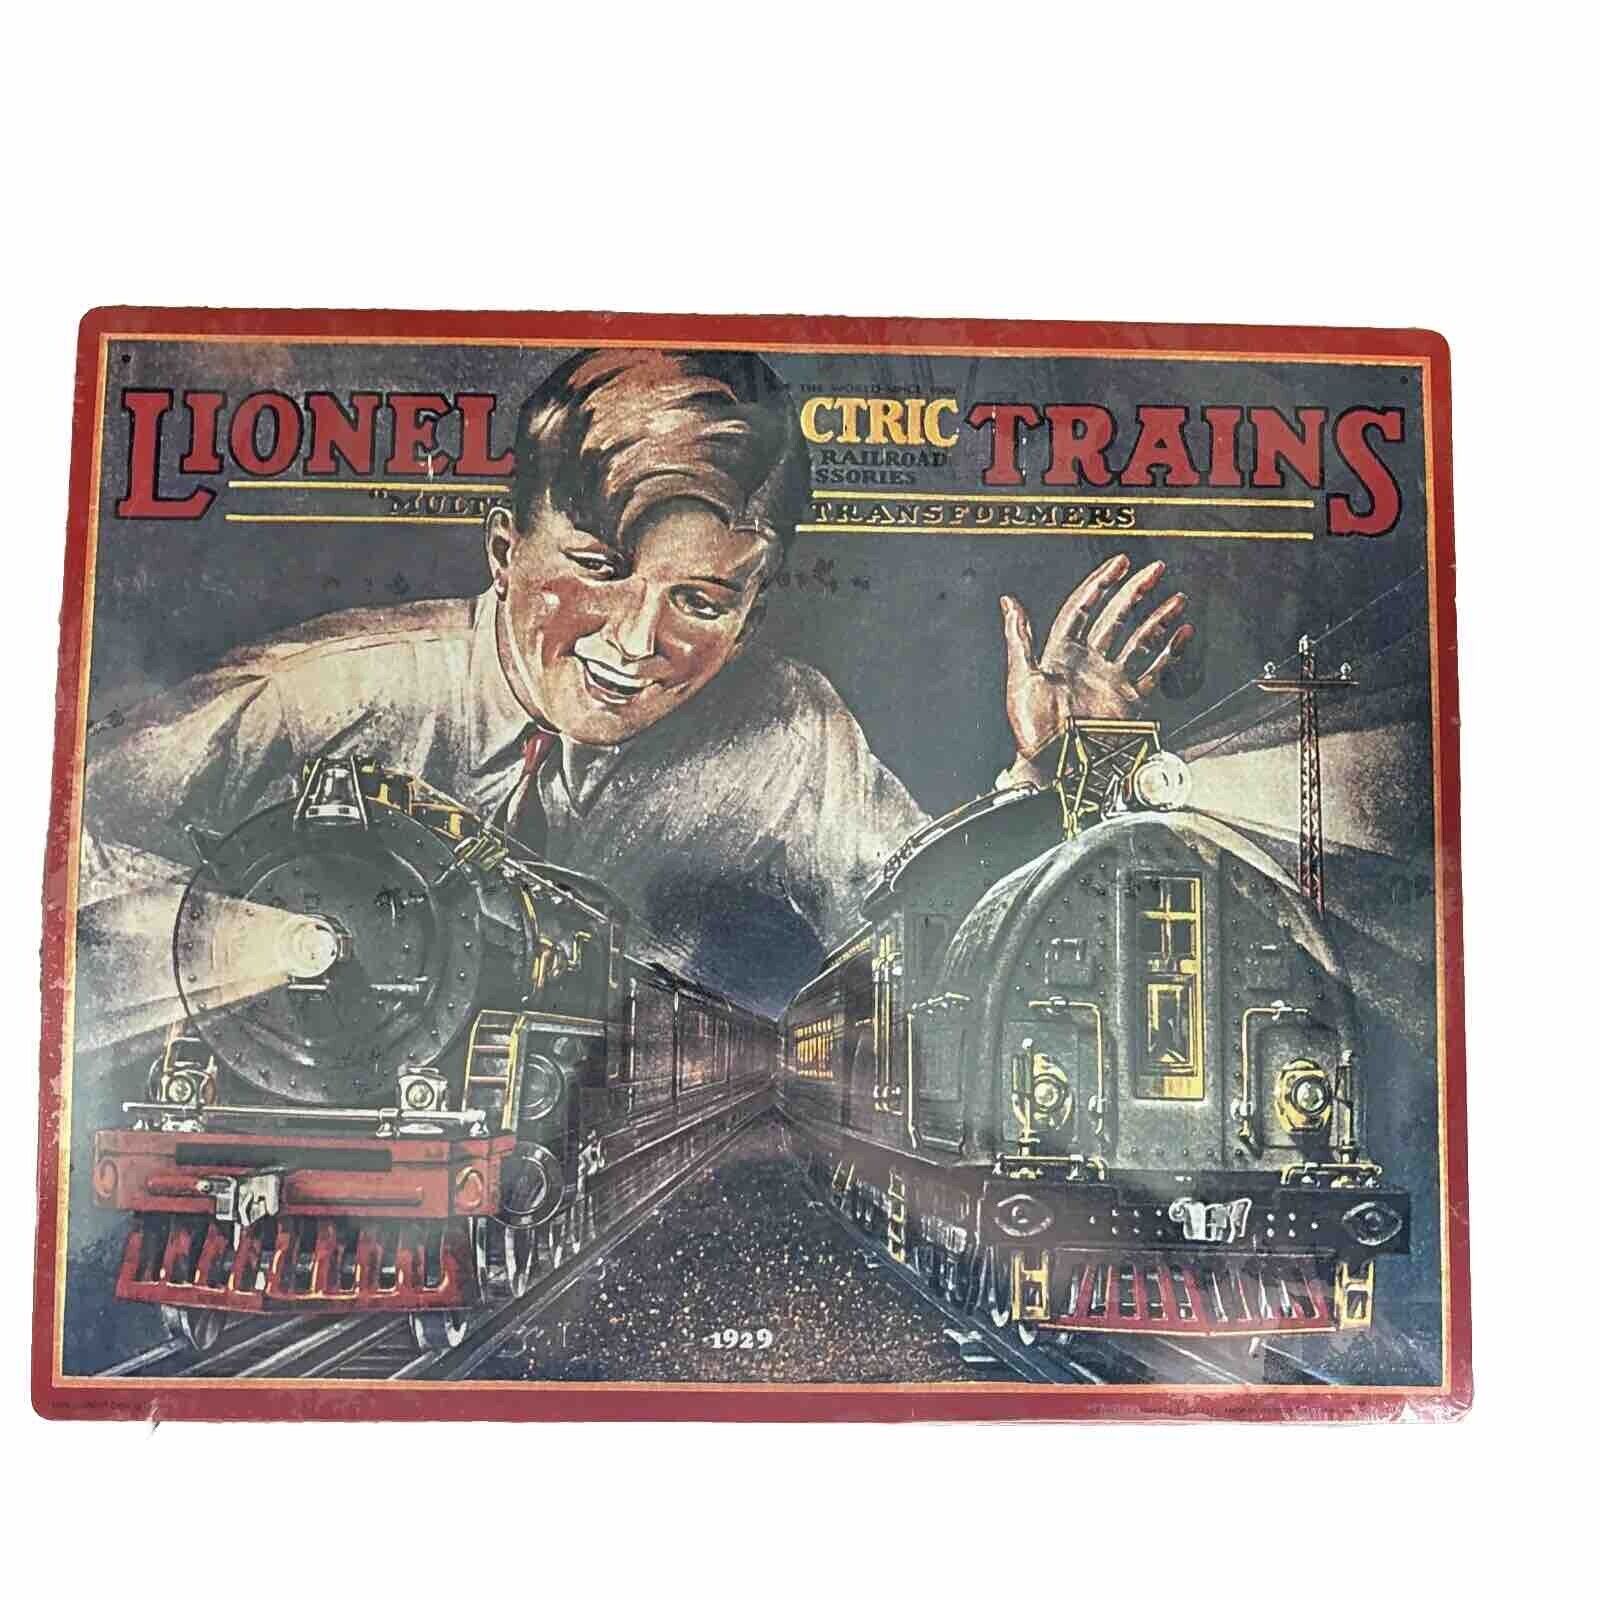 1929 Scarce Lionel Trains Railroad Childhood Toy metal tin sign picture wall art